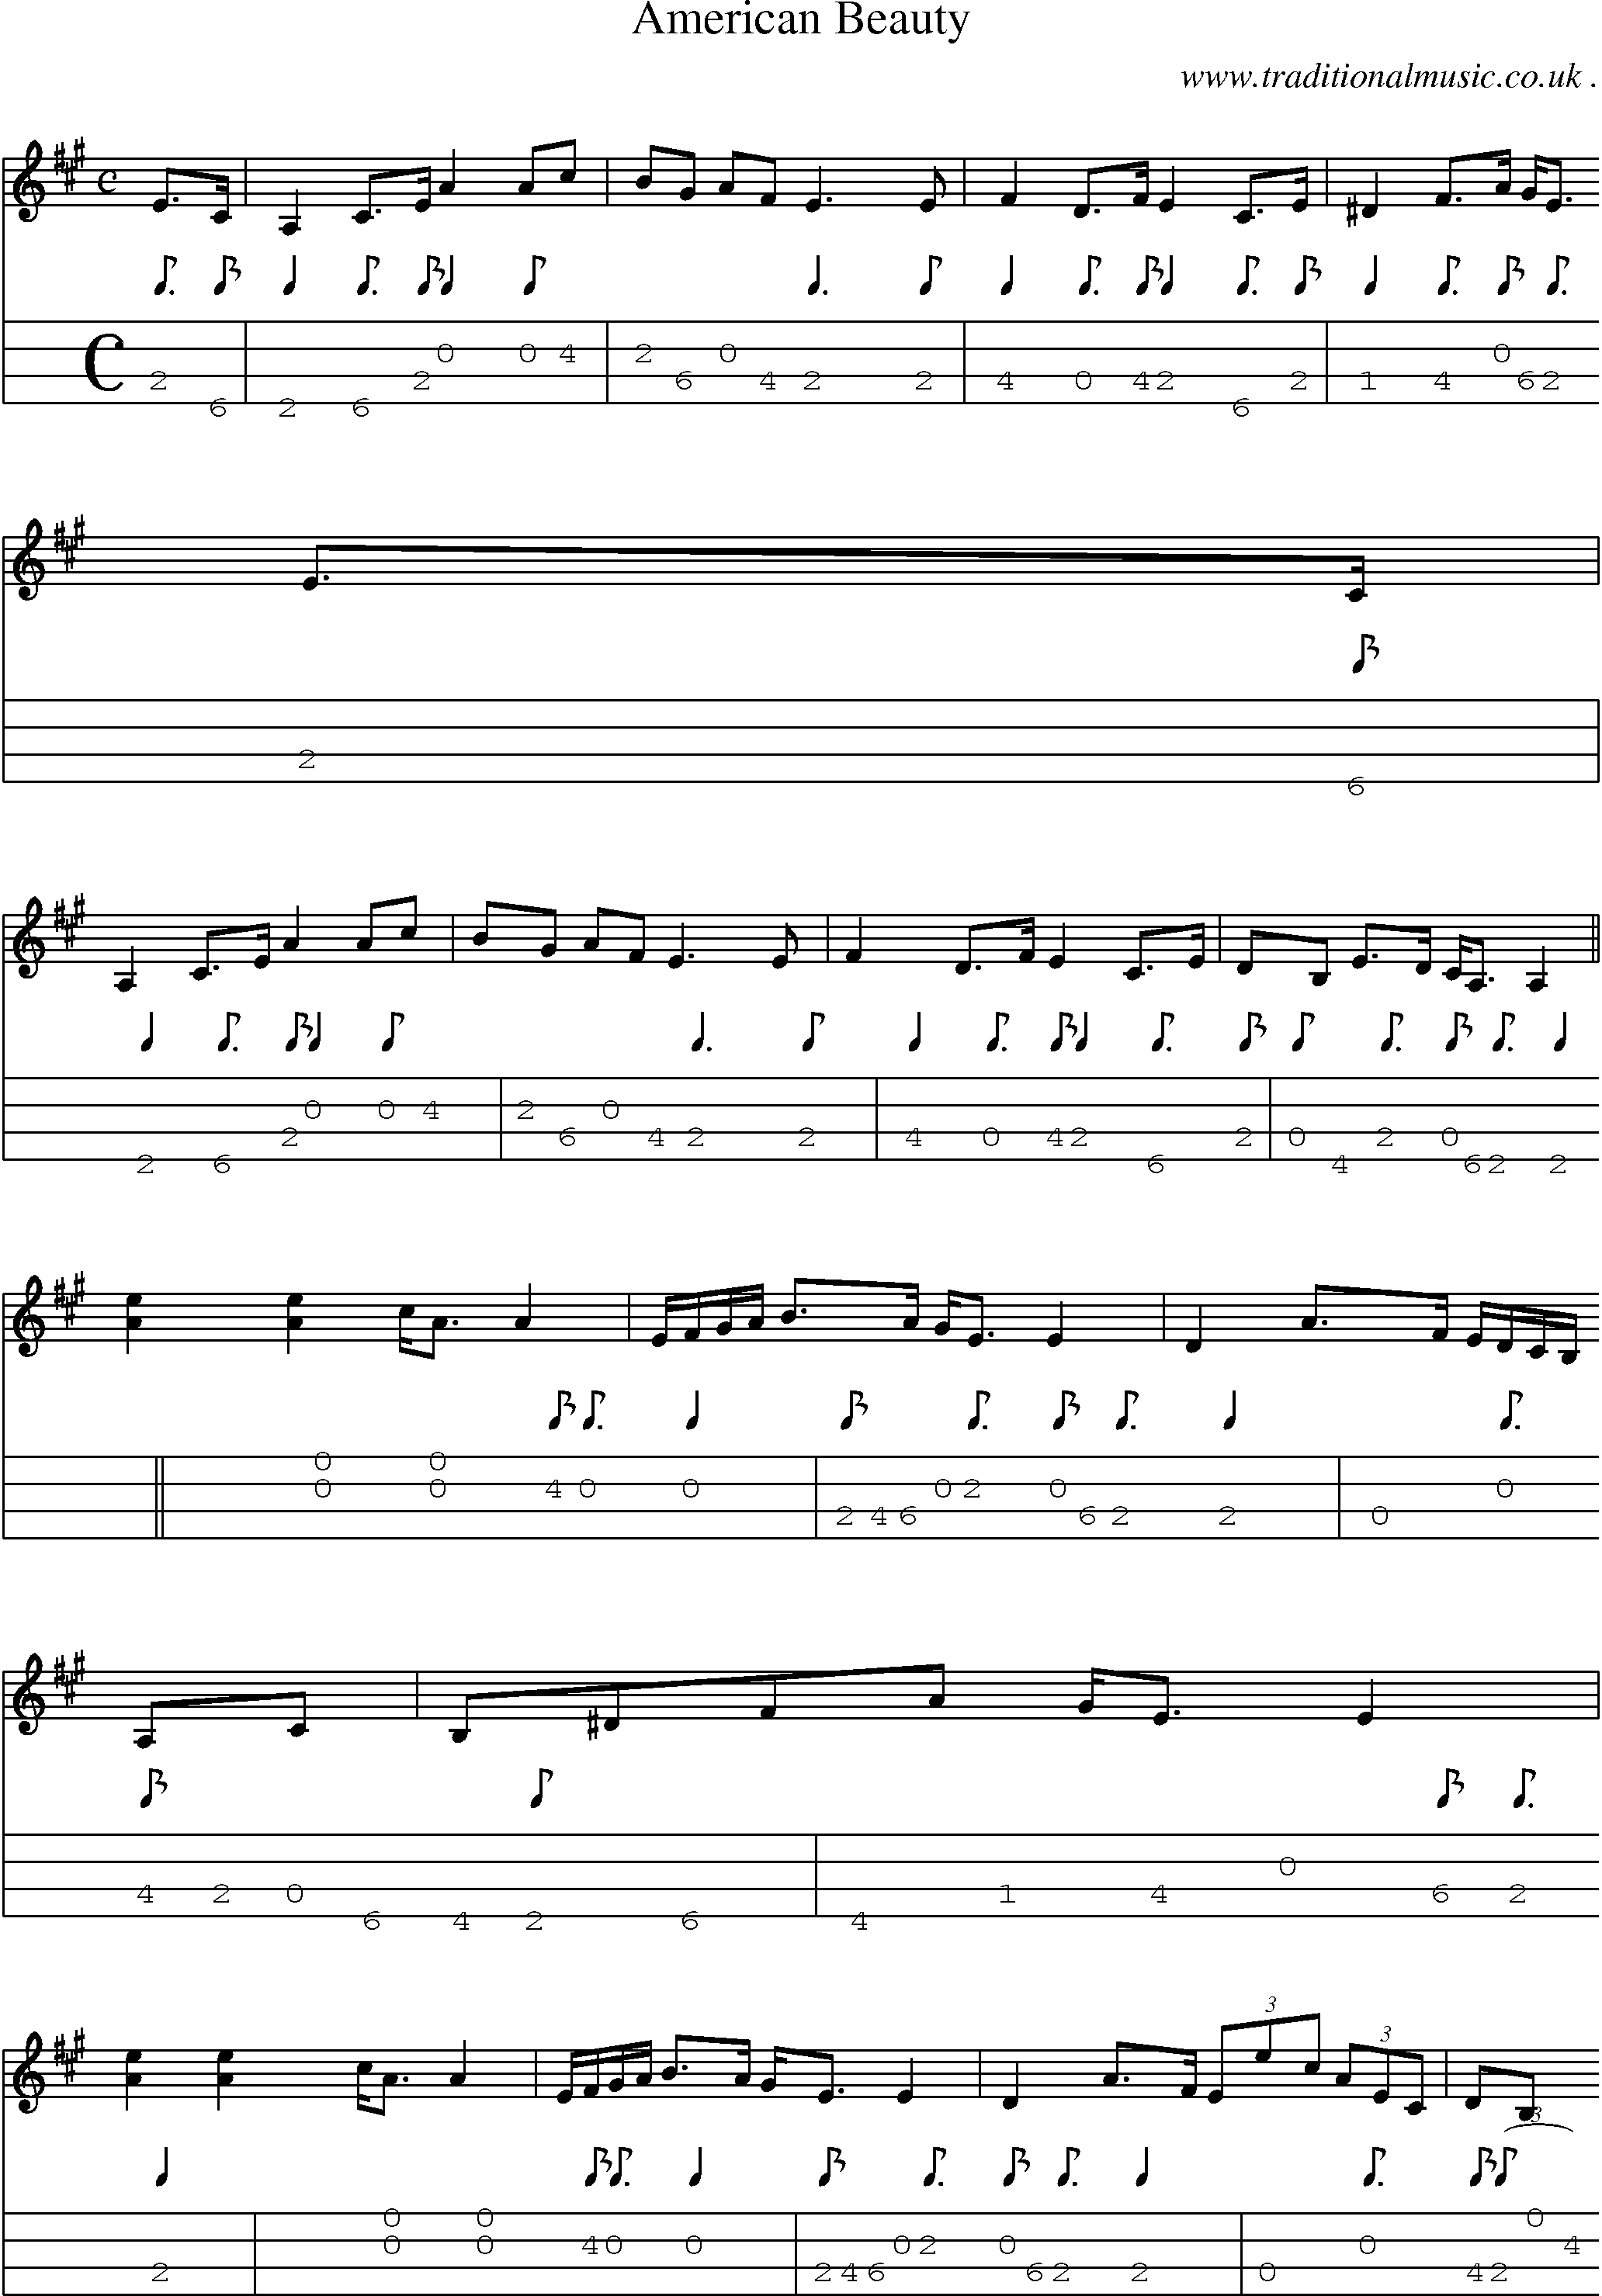 Sheet-music  score, Chords and Mandolin Tabs for American Beauty